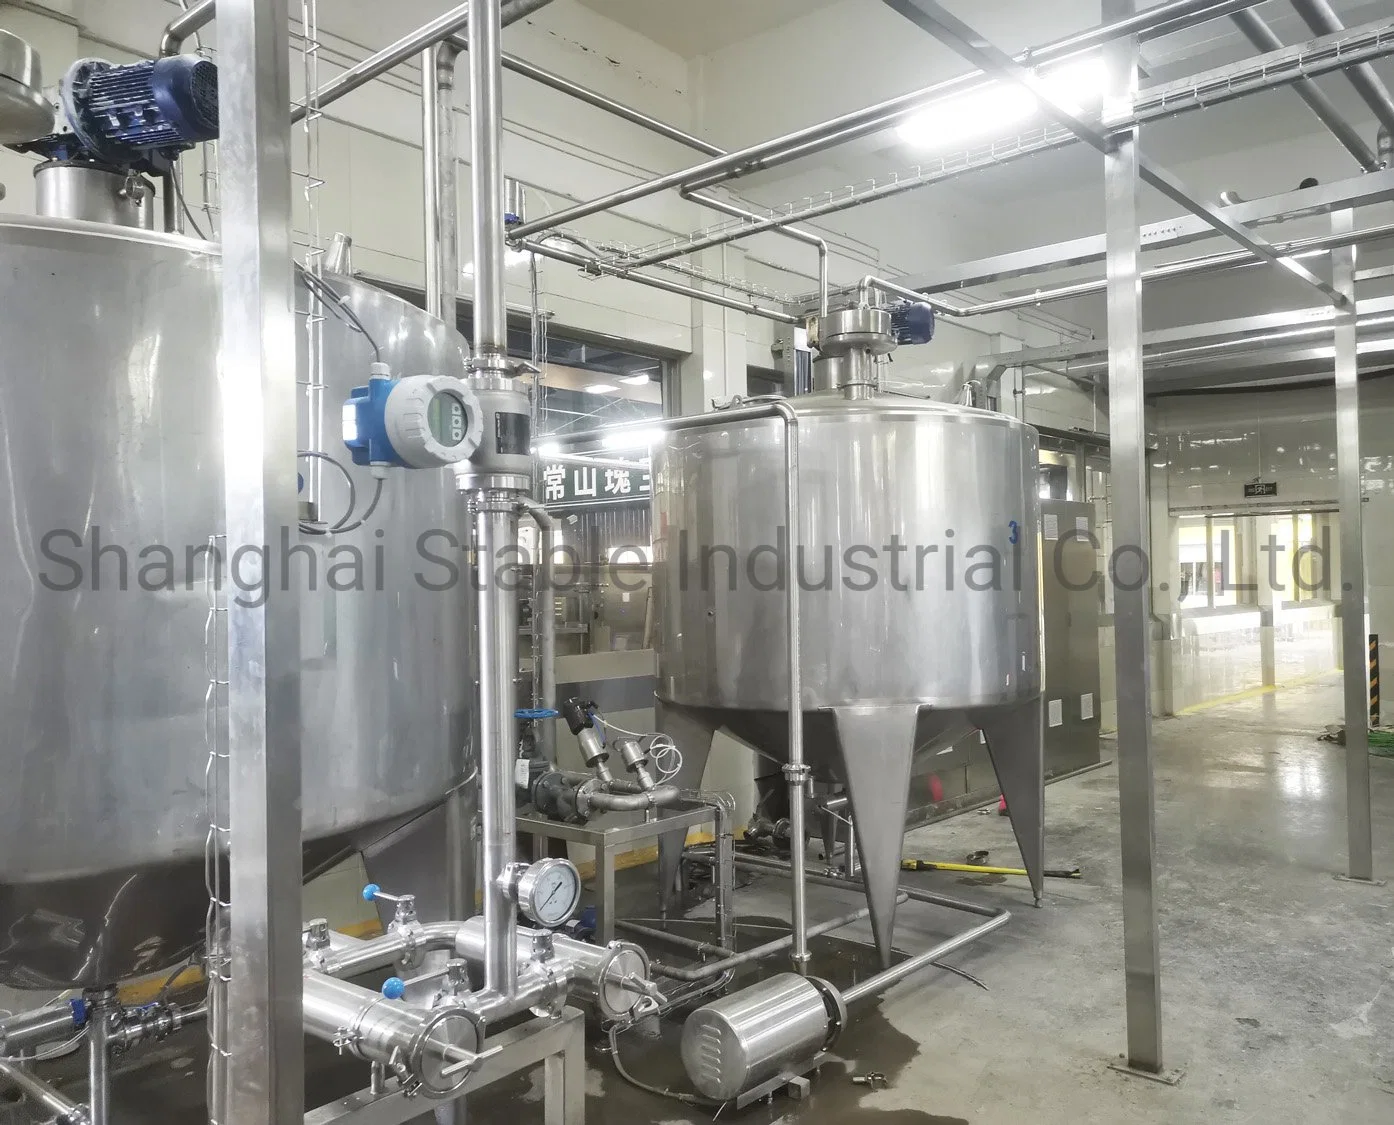 Fully Automatic Juicemaking Machines Equipment Production Line